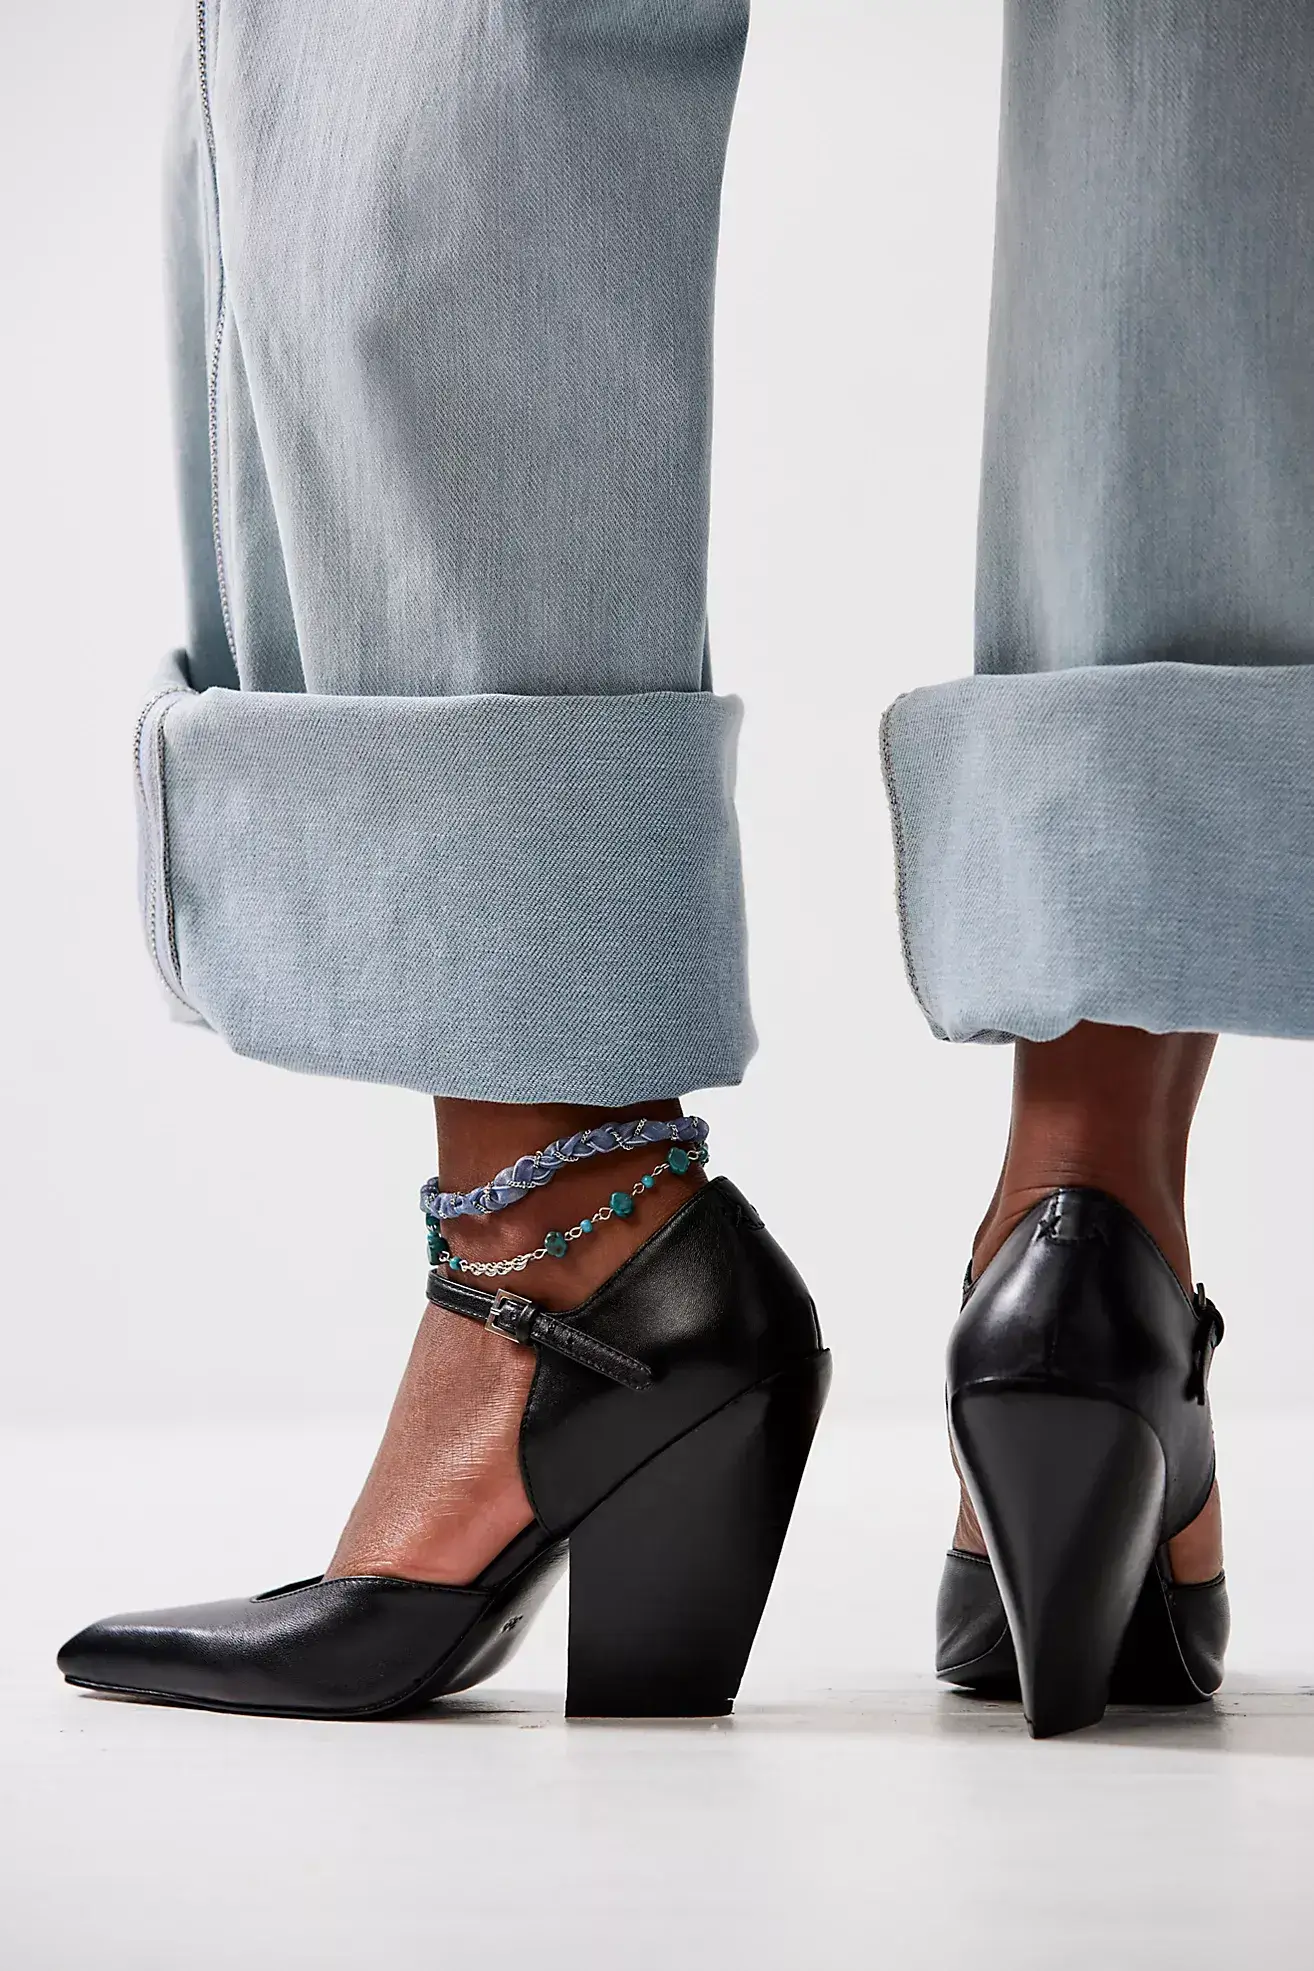 Chunky Block Heel Mary Jane Mary Jane the Mary Jane trend shoes to buy this fall personal stylists share favorite fall shoe silhouettes the best fall shoes nashville stylists share favorite shoes for fall heeled Mary janes how to buy Mary janes